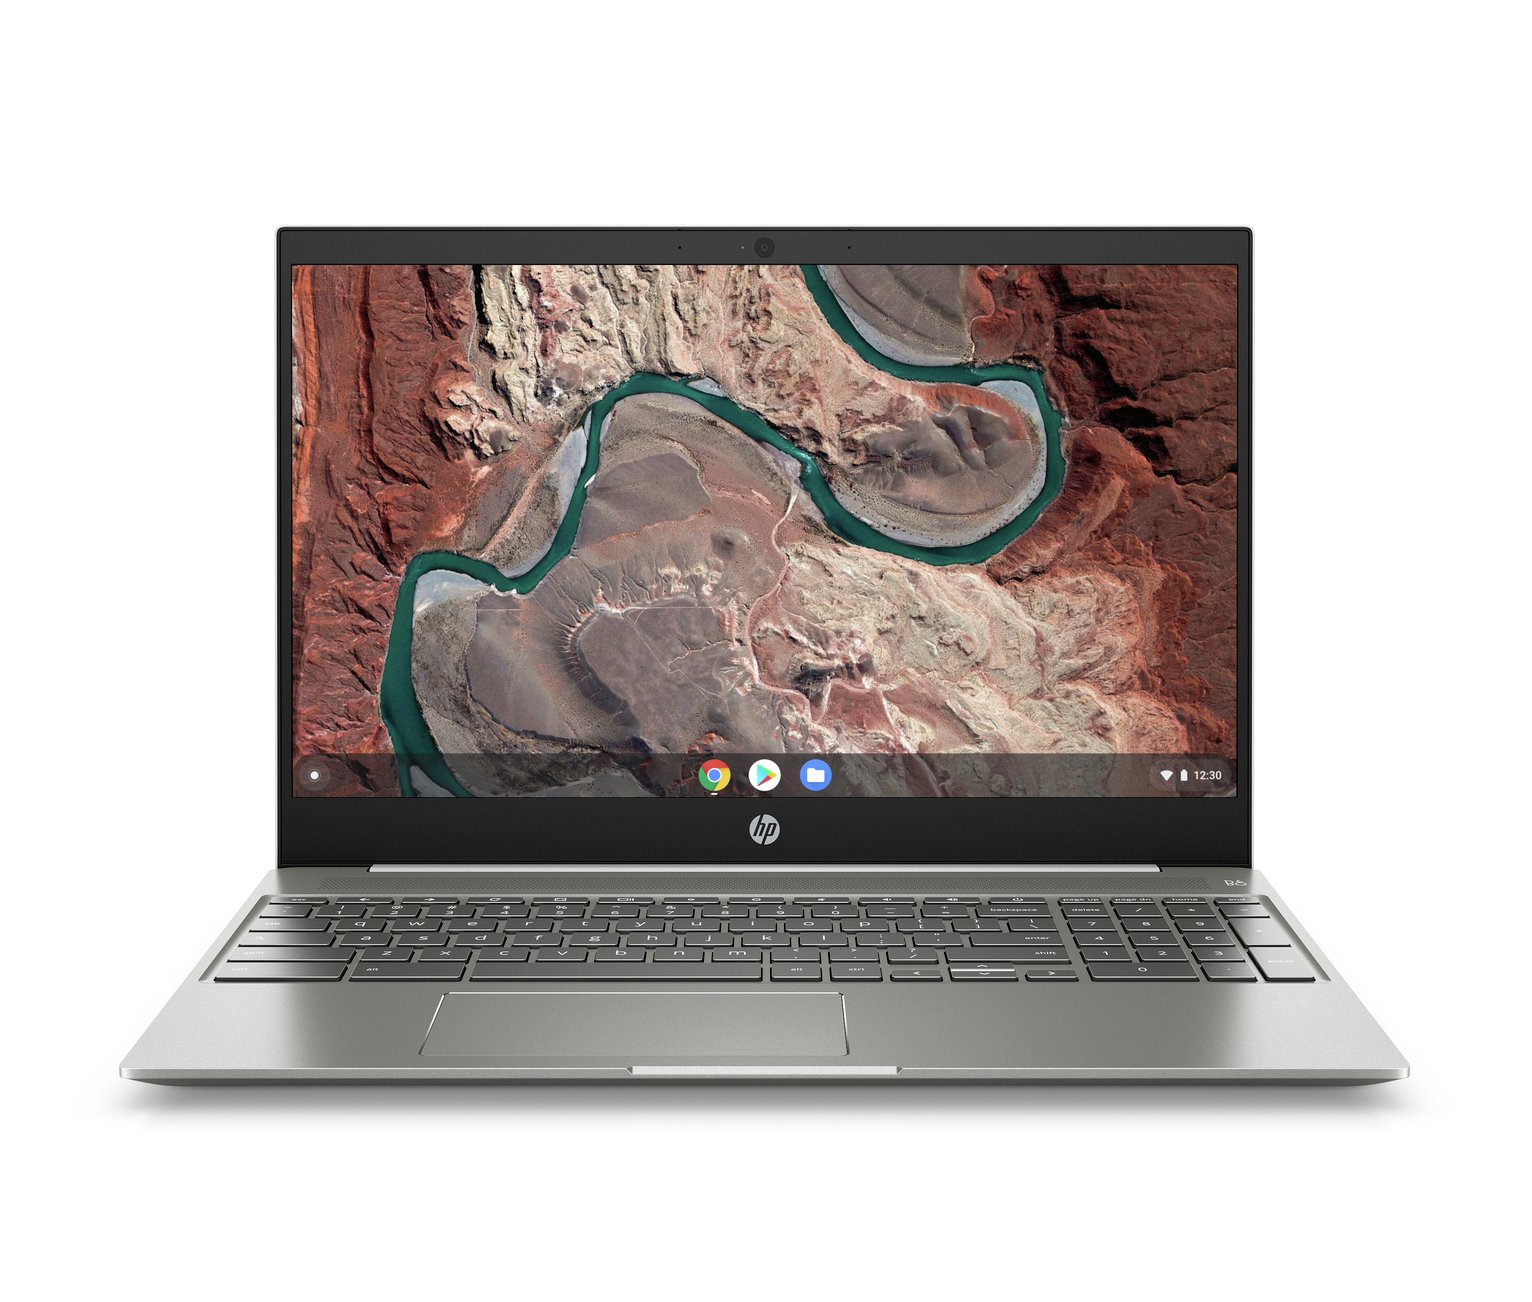 HP 15.6in i5 8GB 128GB FHD Chromebook Review